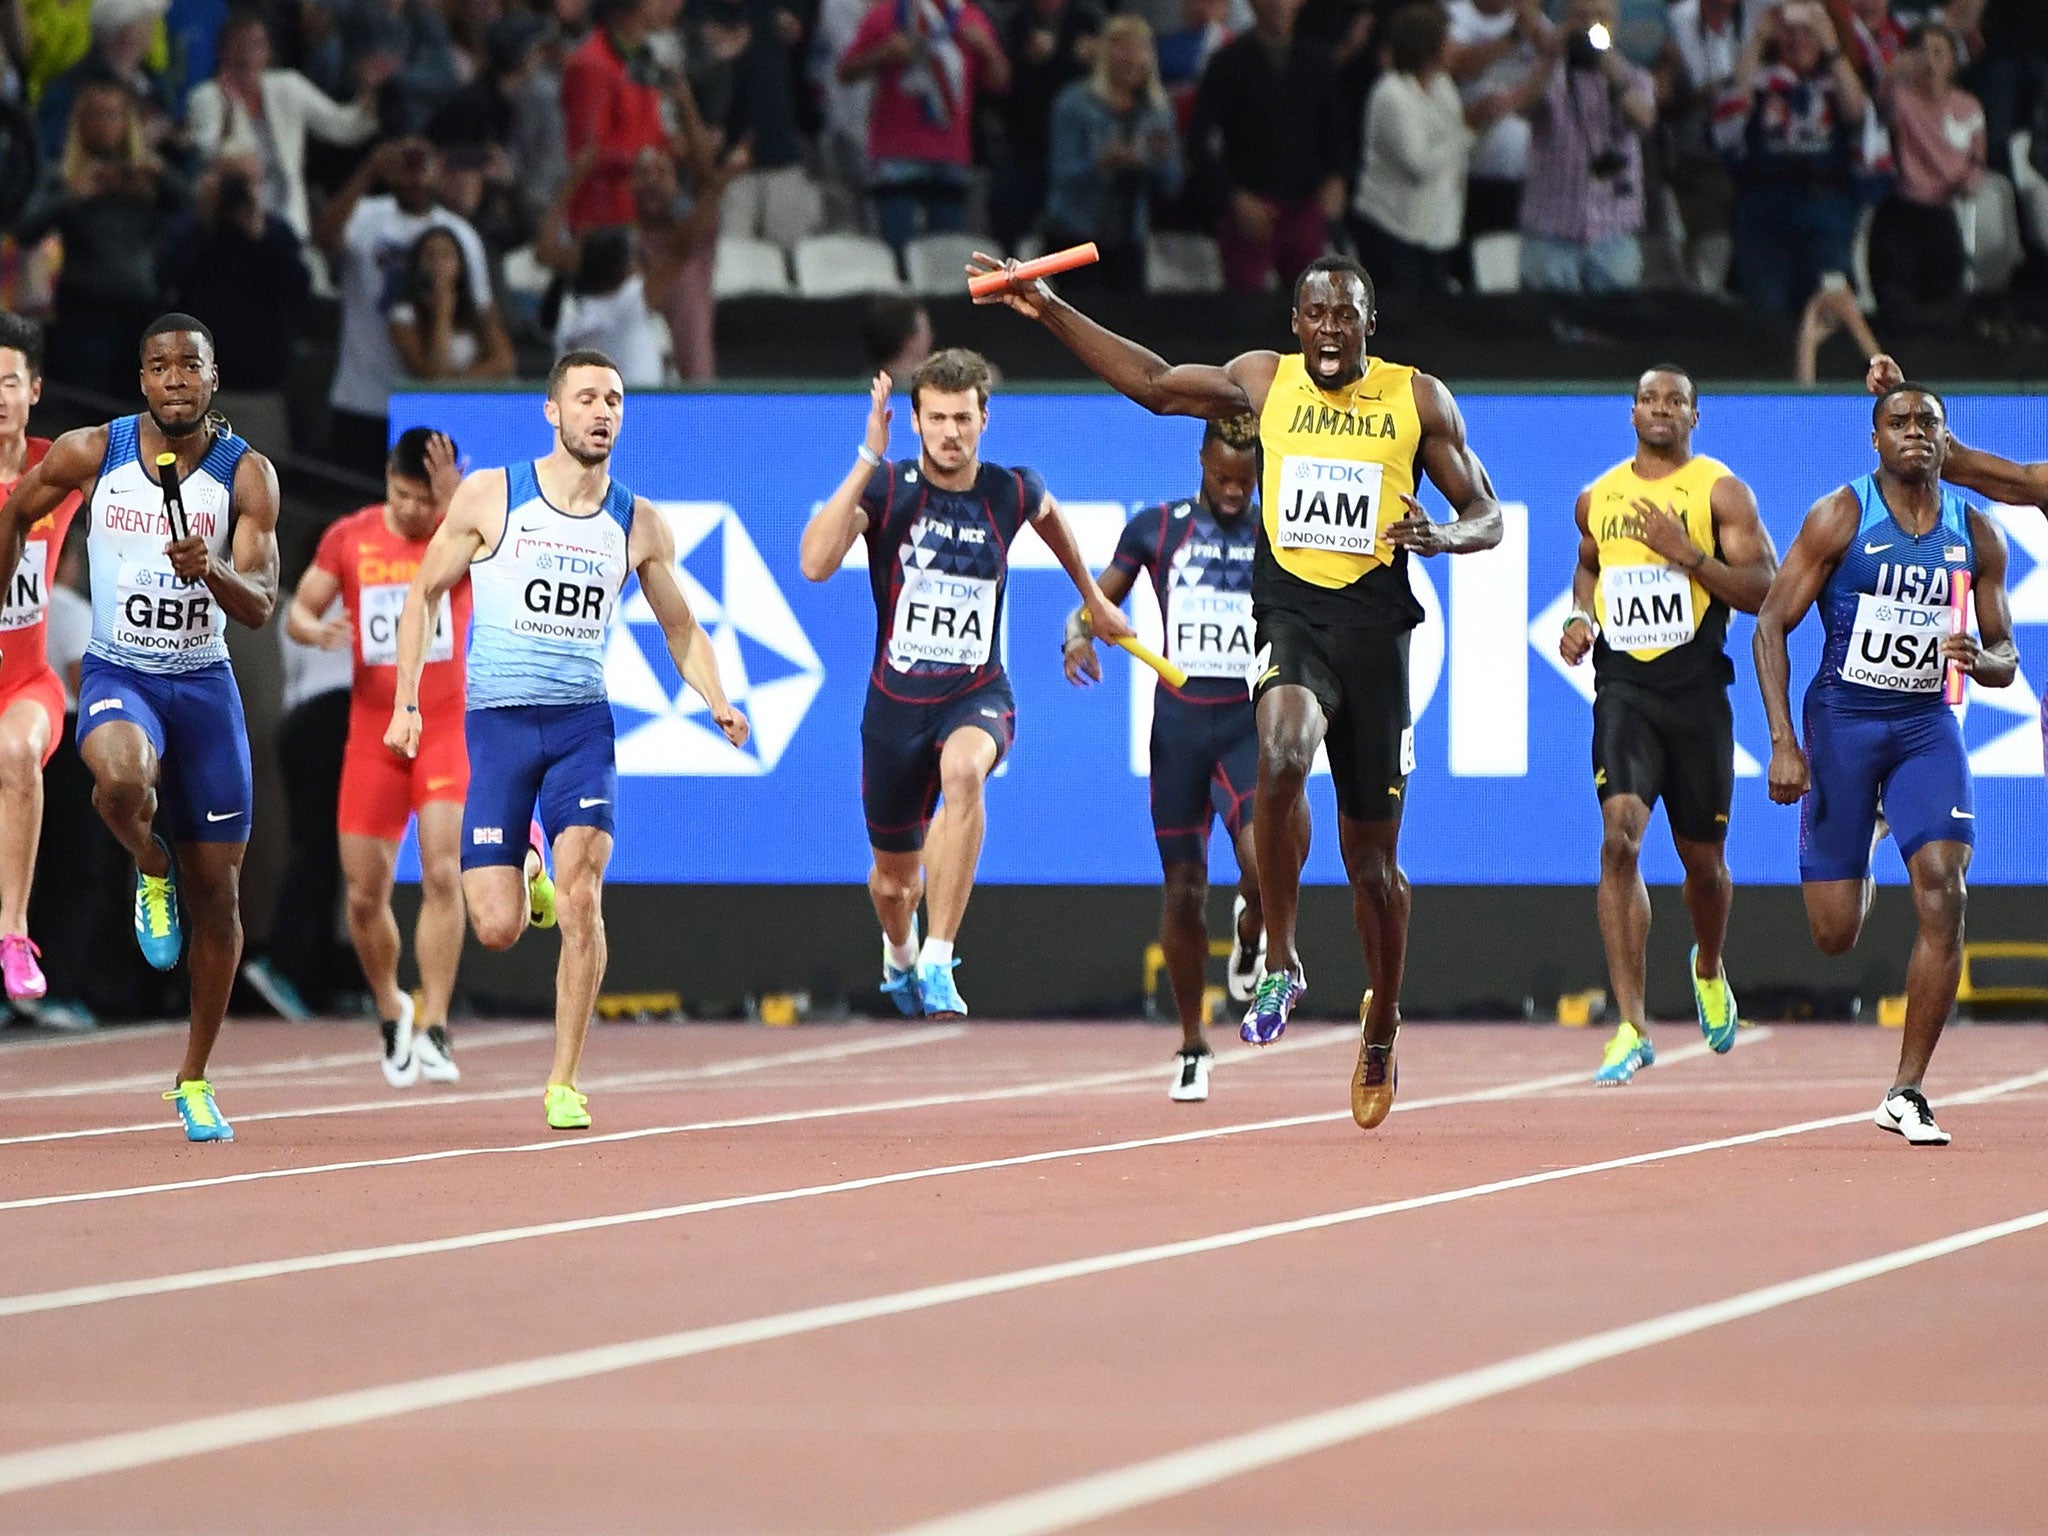 Great Britain and USA were ahead of Jamaica when Bolt suffered injury